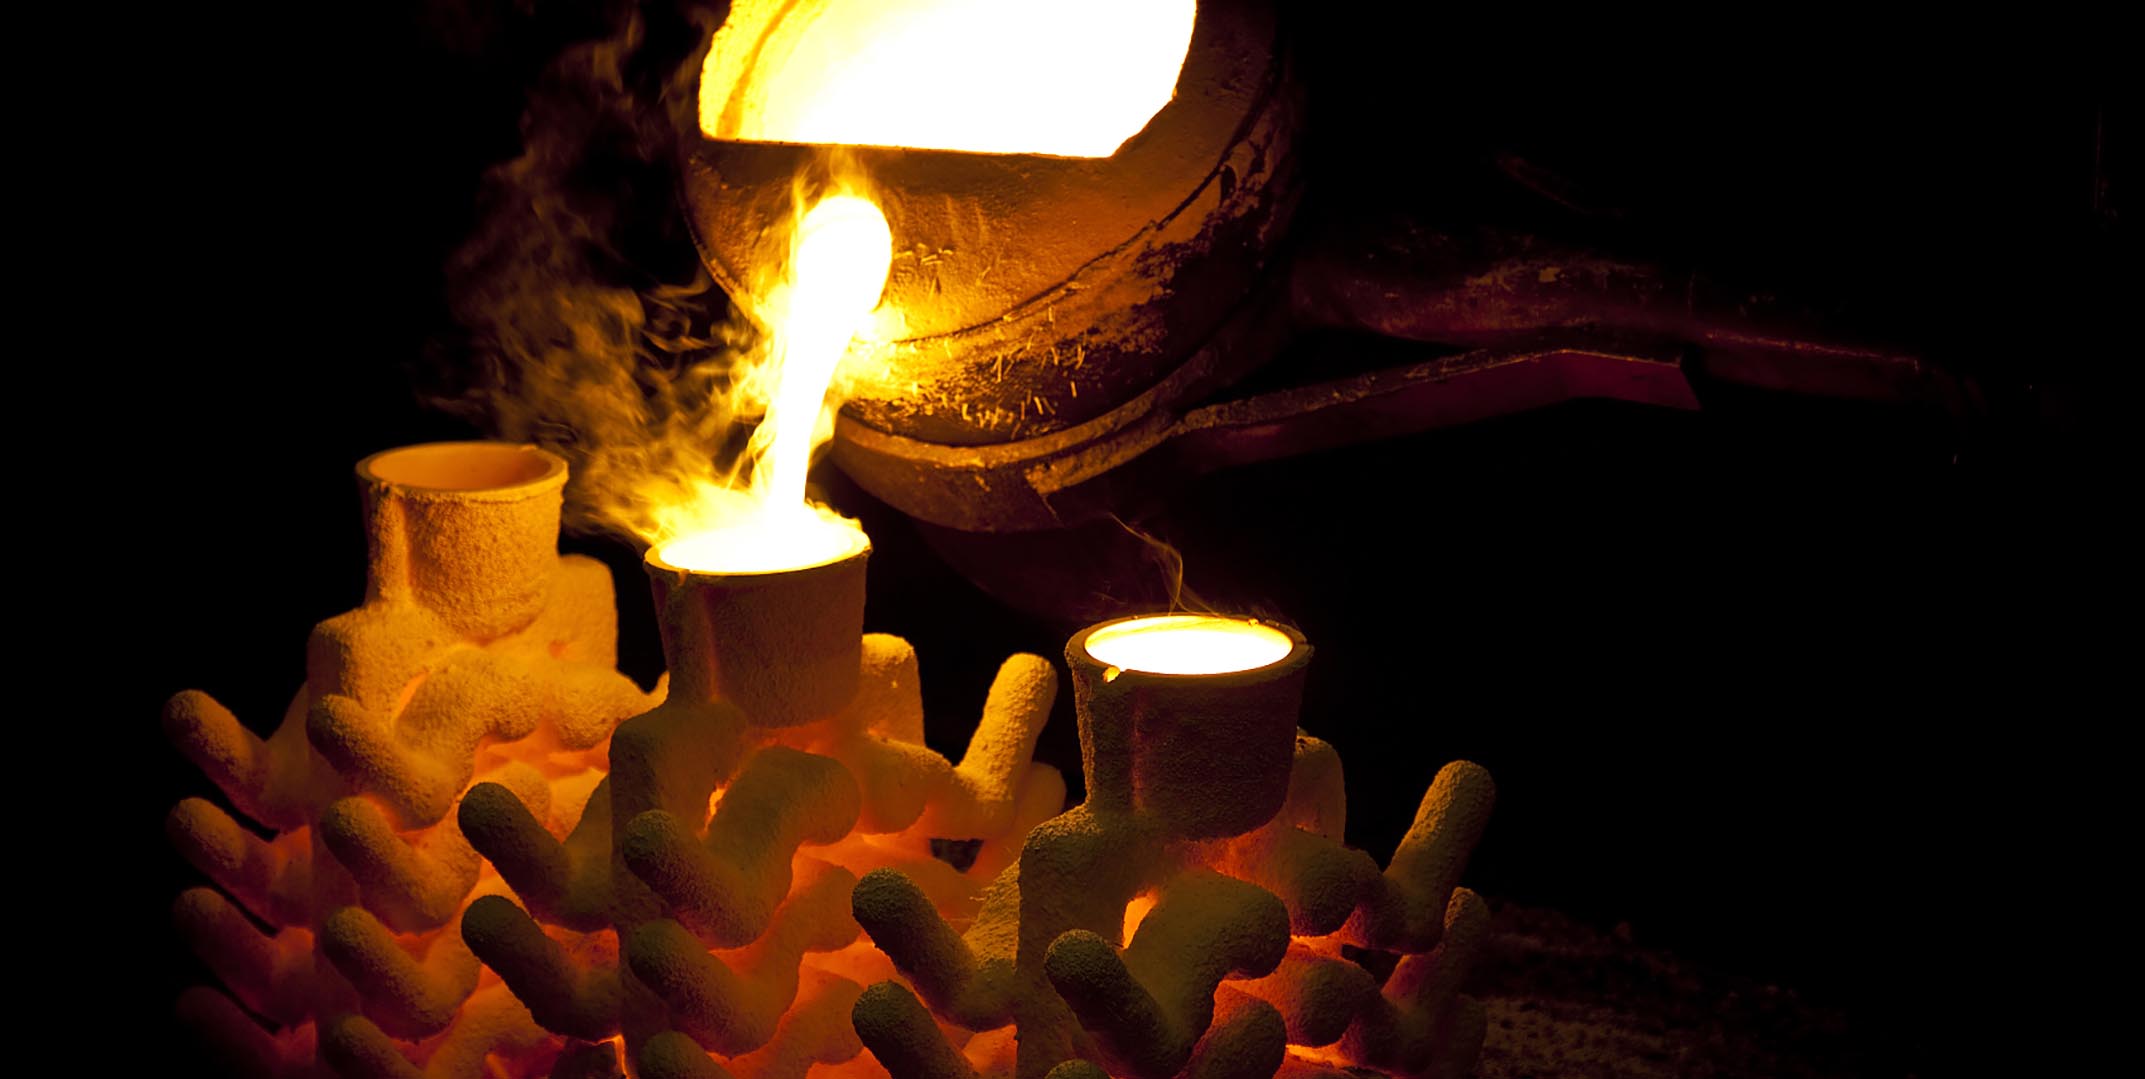  Advanced Lost Wax Casting Technology